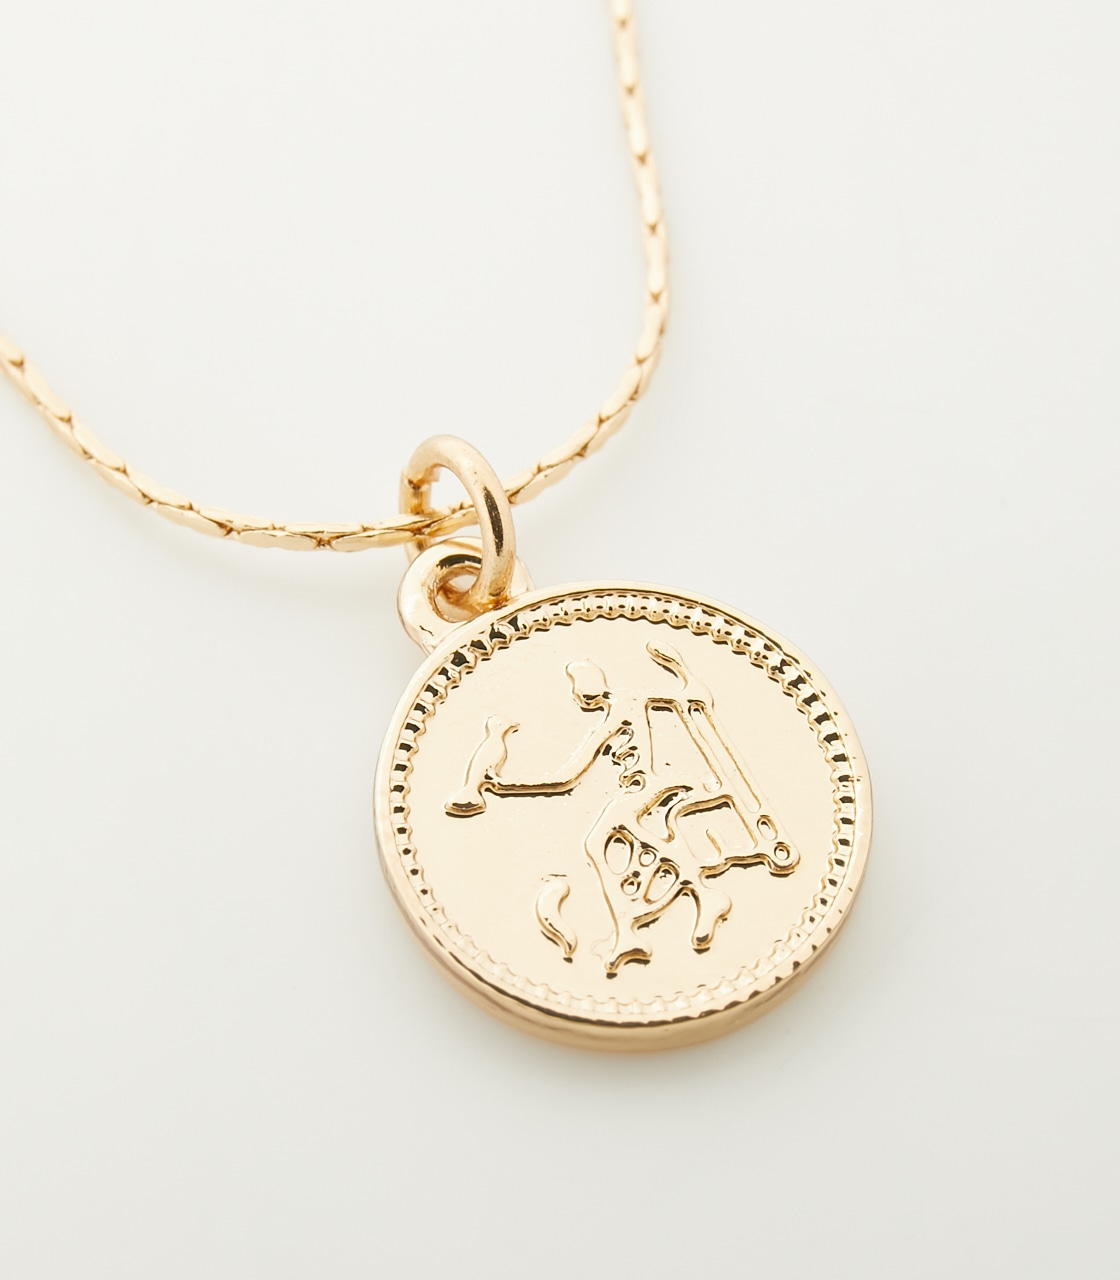 DOUBLE CHAIN COIN NECKLACE/ダブルチェーンコインネックレス 詳細画像 L/GLD 2